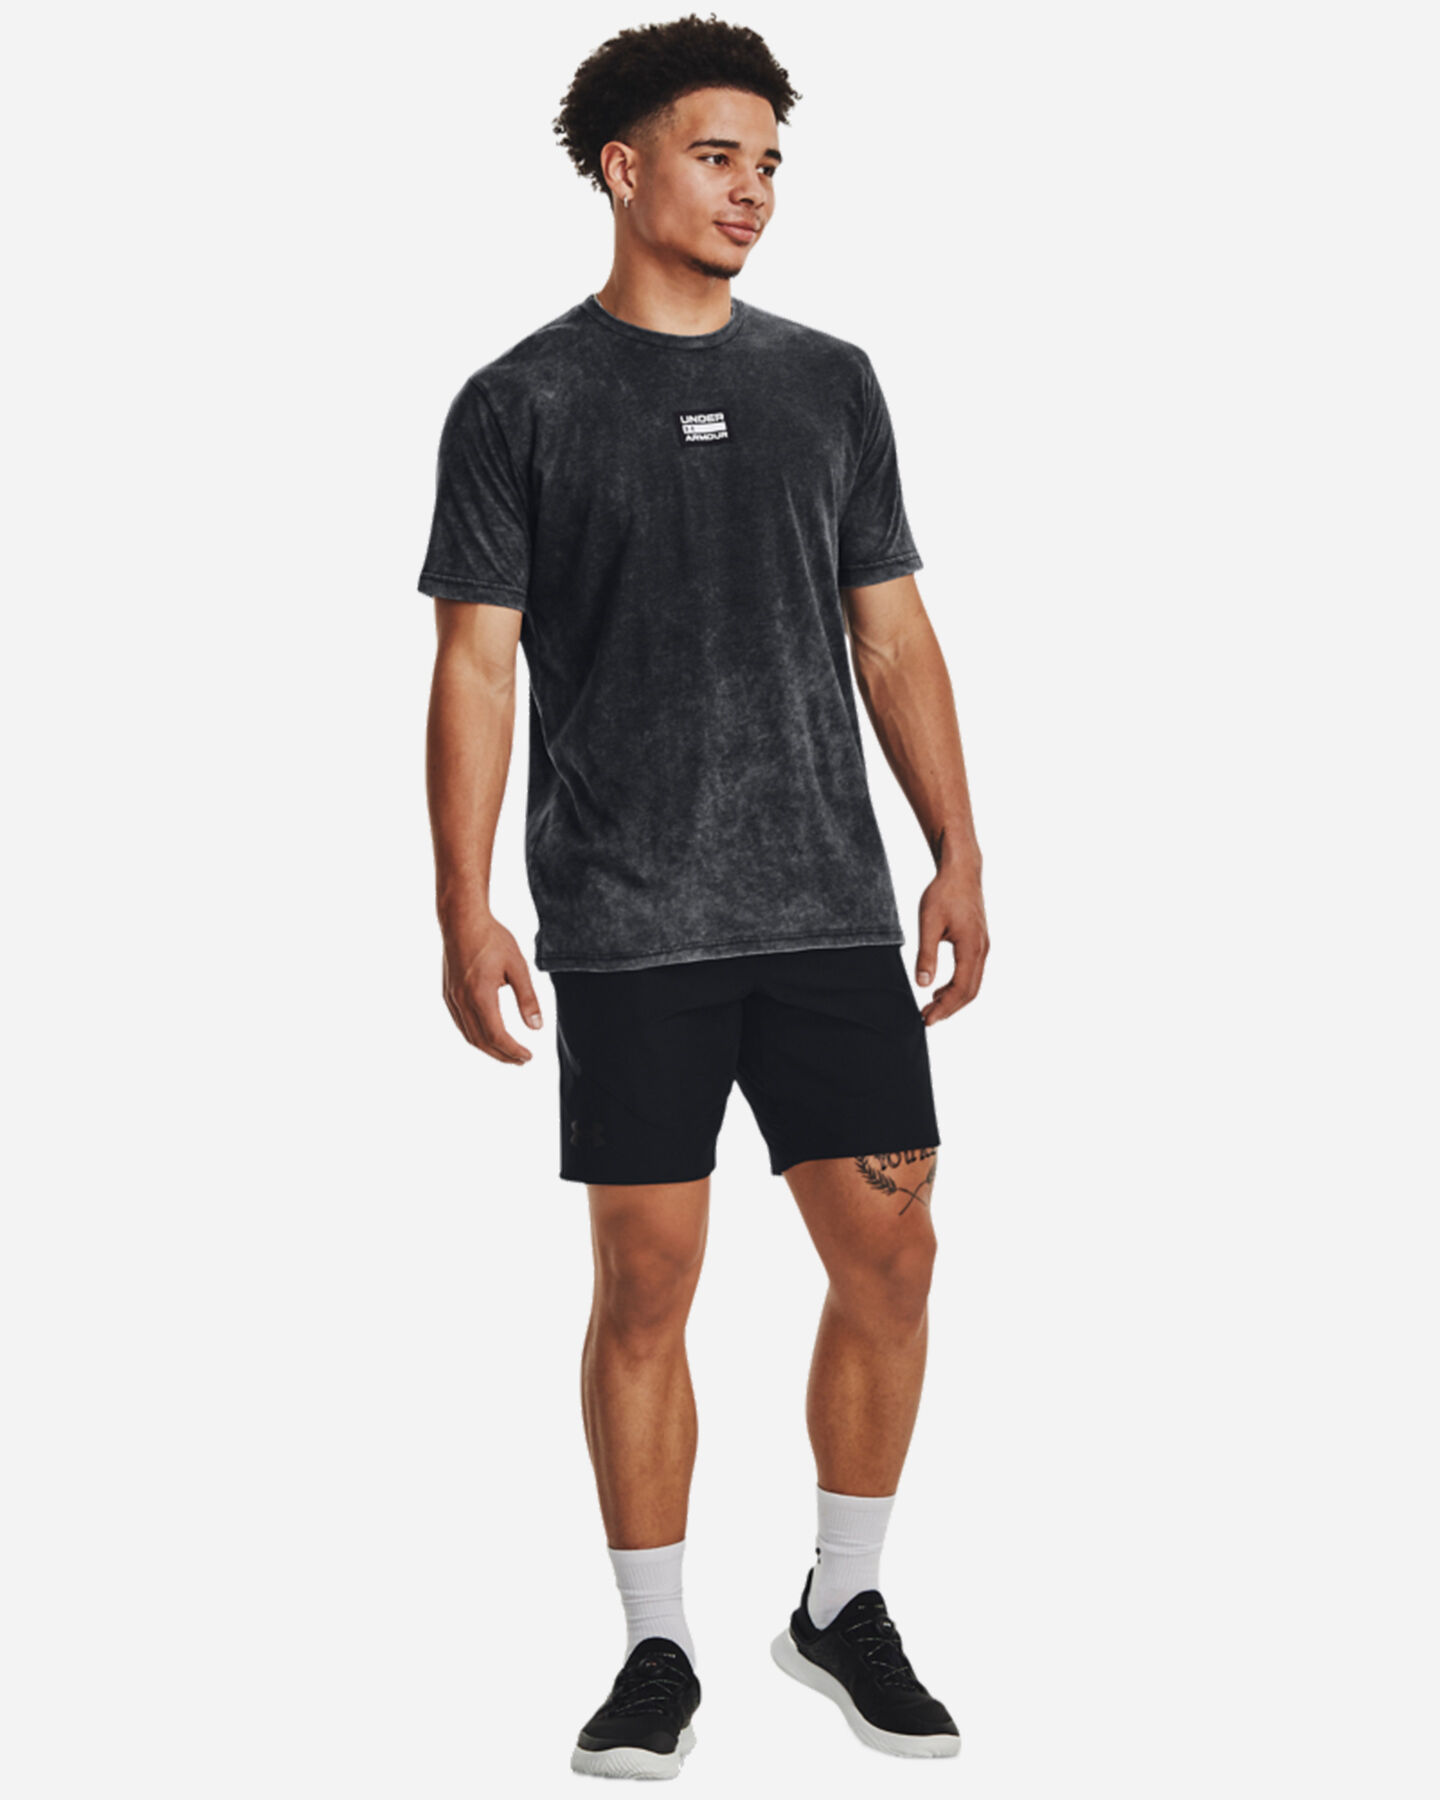  T-Shirt UNDER ARMOUR LOGO ELEVET CORE WASH M S5579486|0001|LG scatto 2